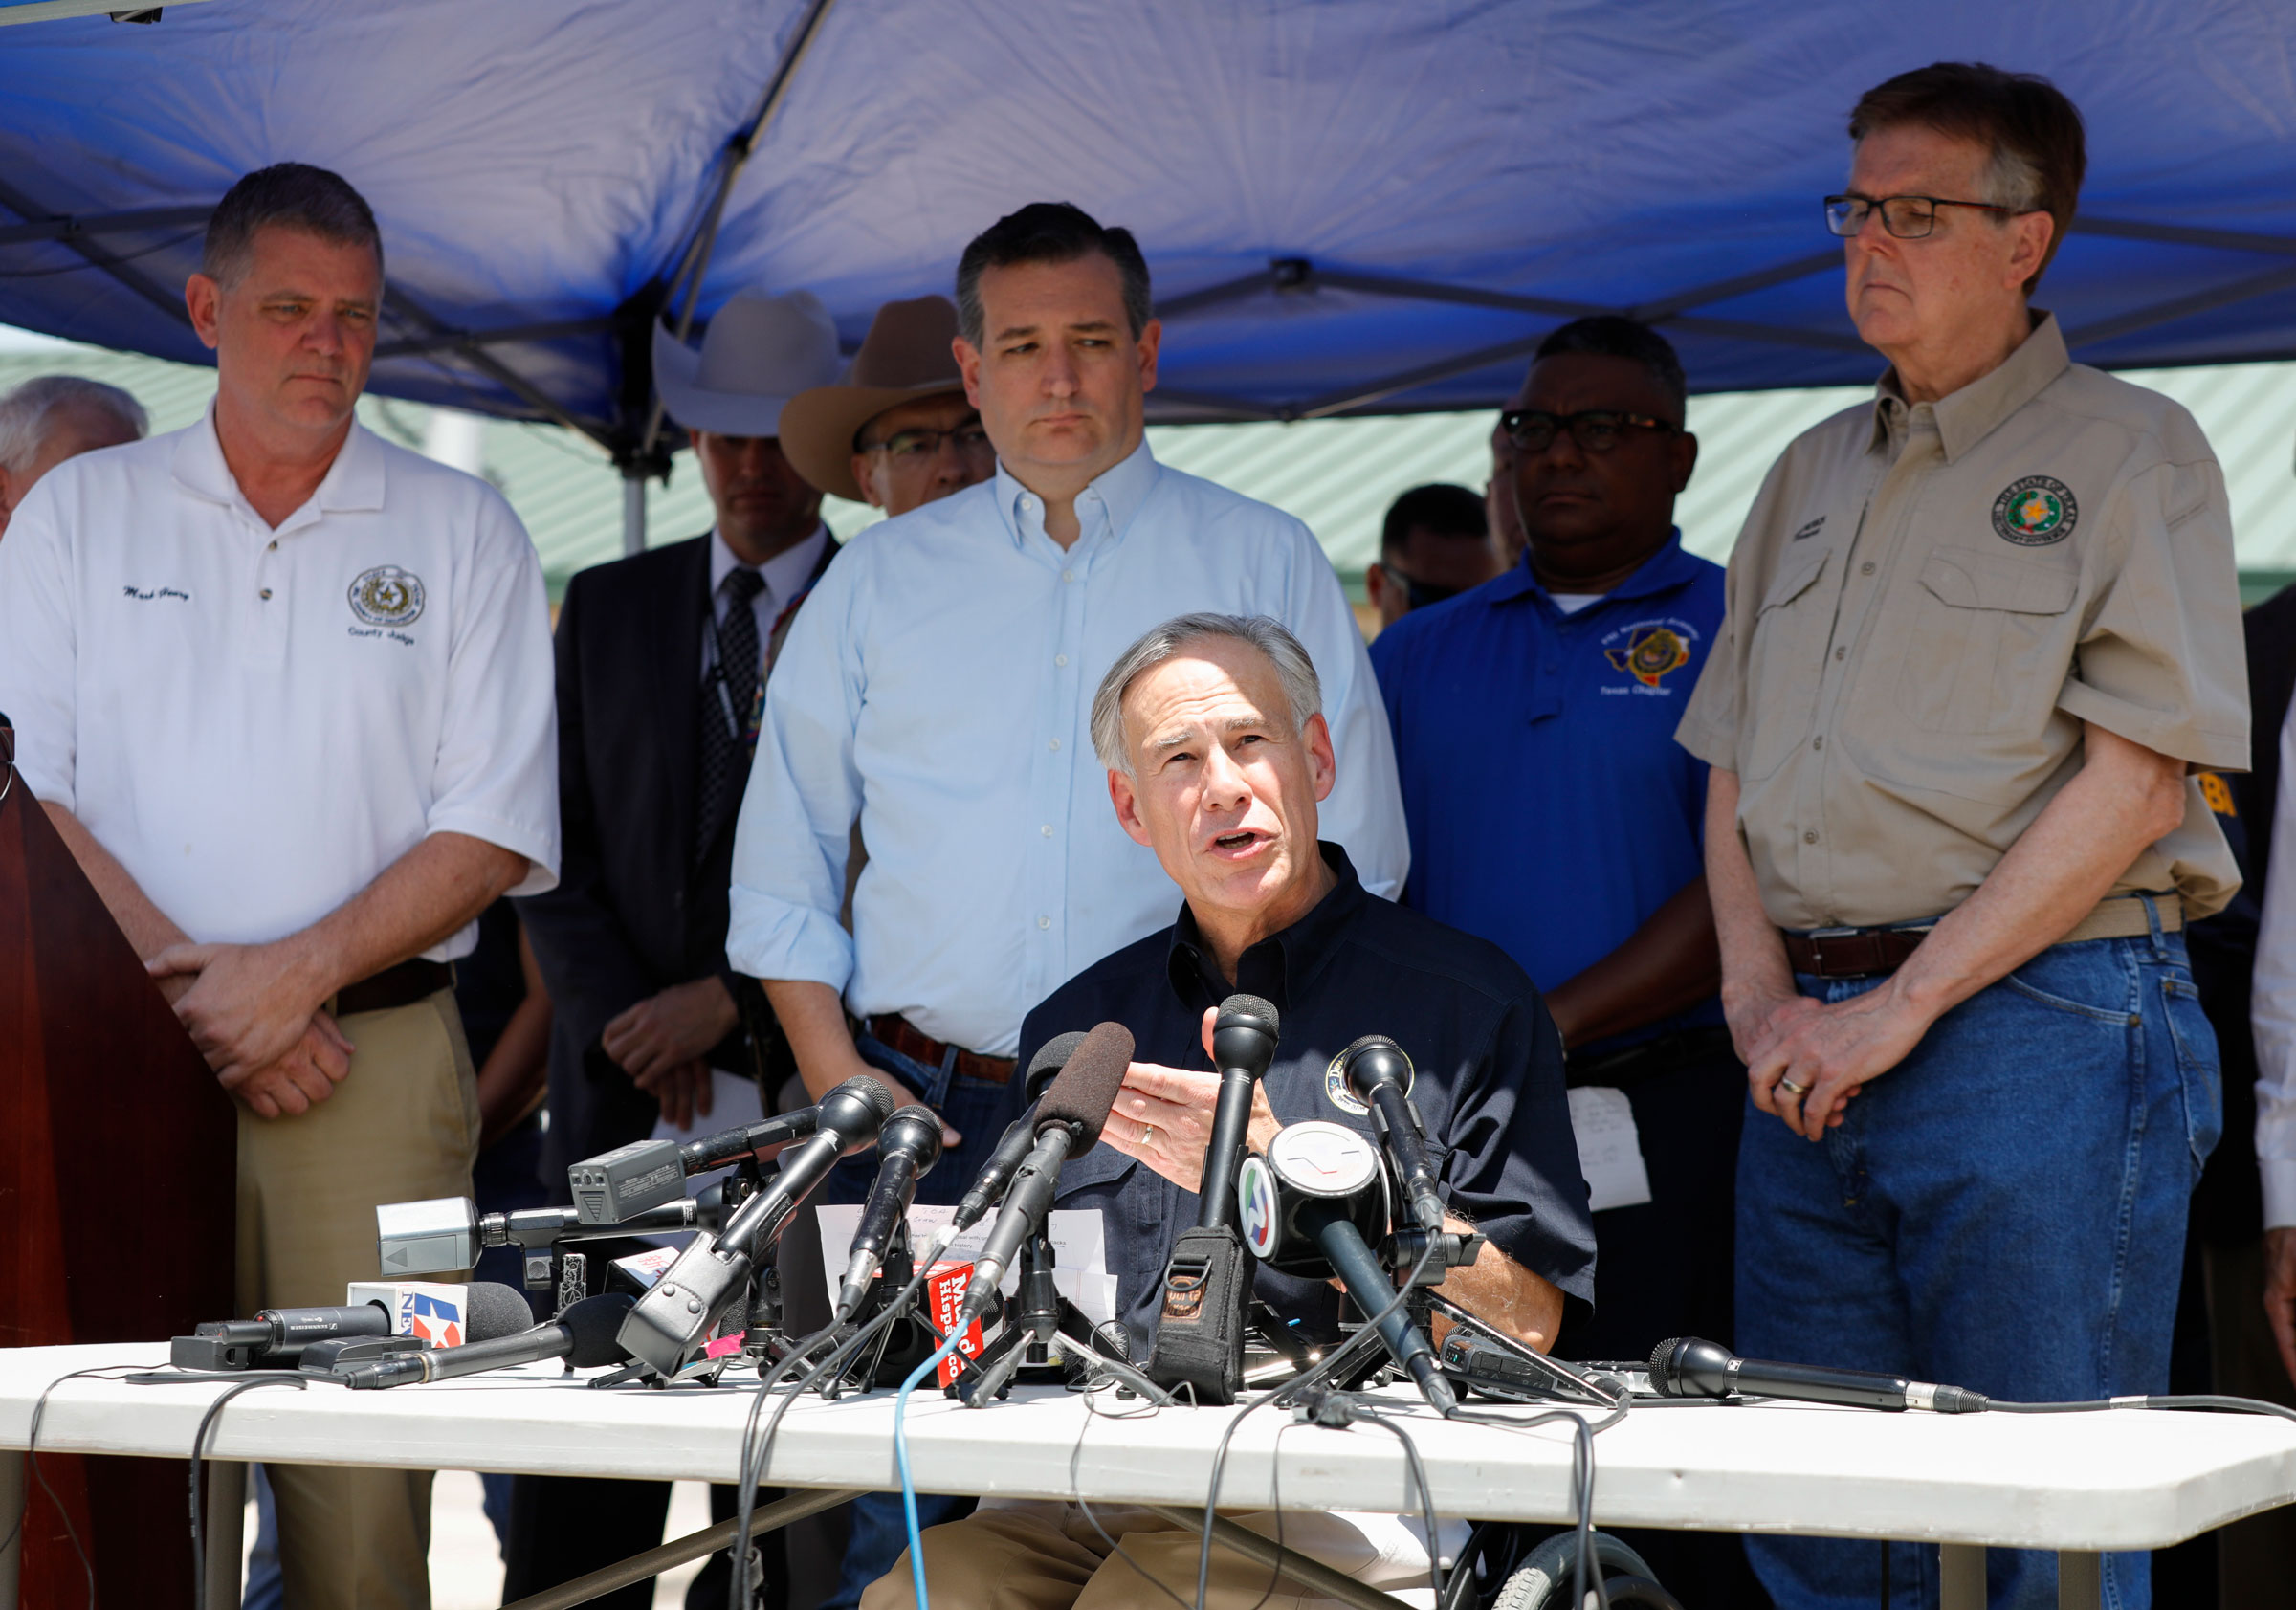 Galveston County Judge Mark Henry, Sen.Ted Cruz, Texas Gov. Greg Abbott and Texas Lt. Gov. Dan Patrick speak to the media during a press conference about the shooting incident at Santa Fe High School May 18, 2018 in Santa Fe, Texas. (Bob Levey—Getty Images)